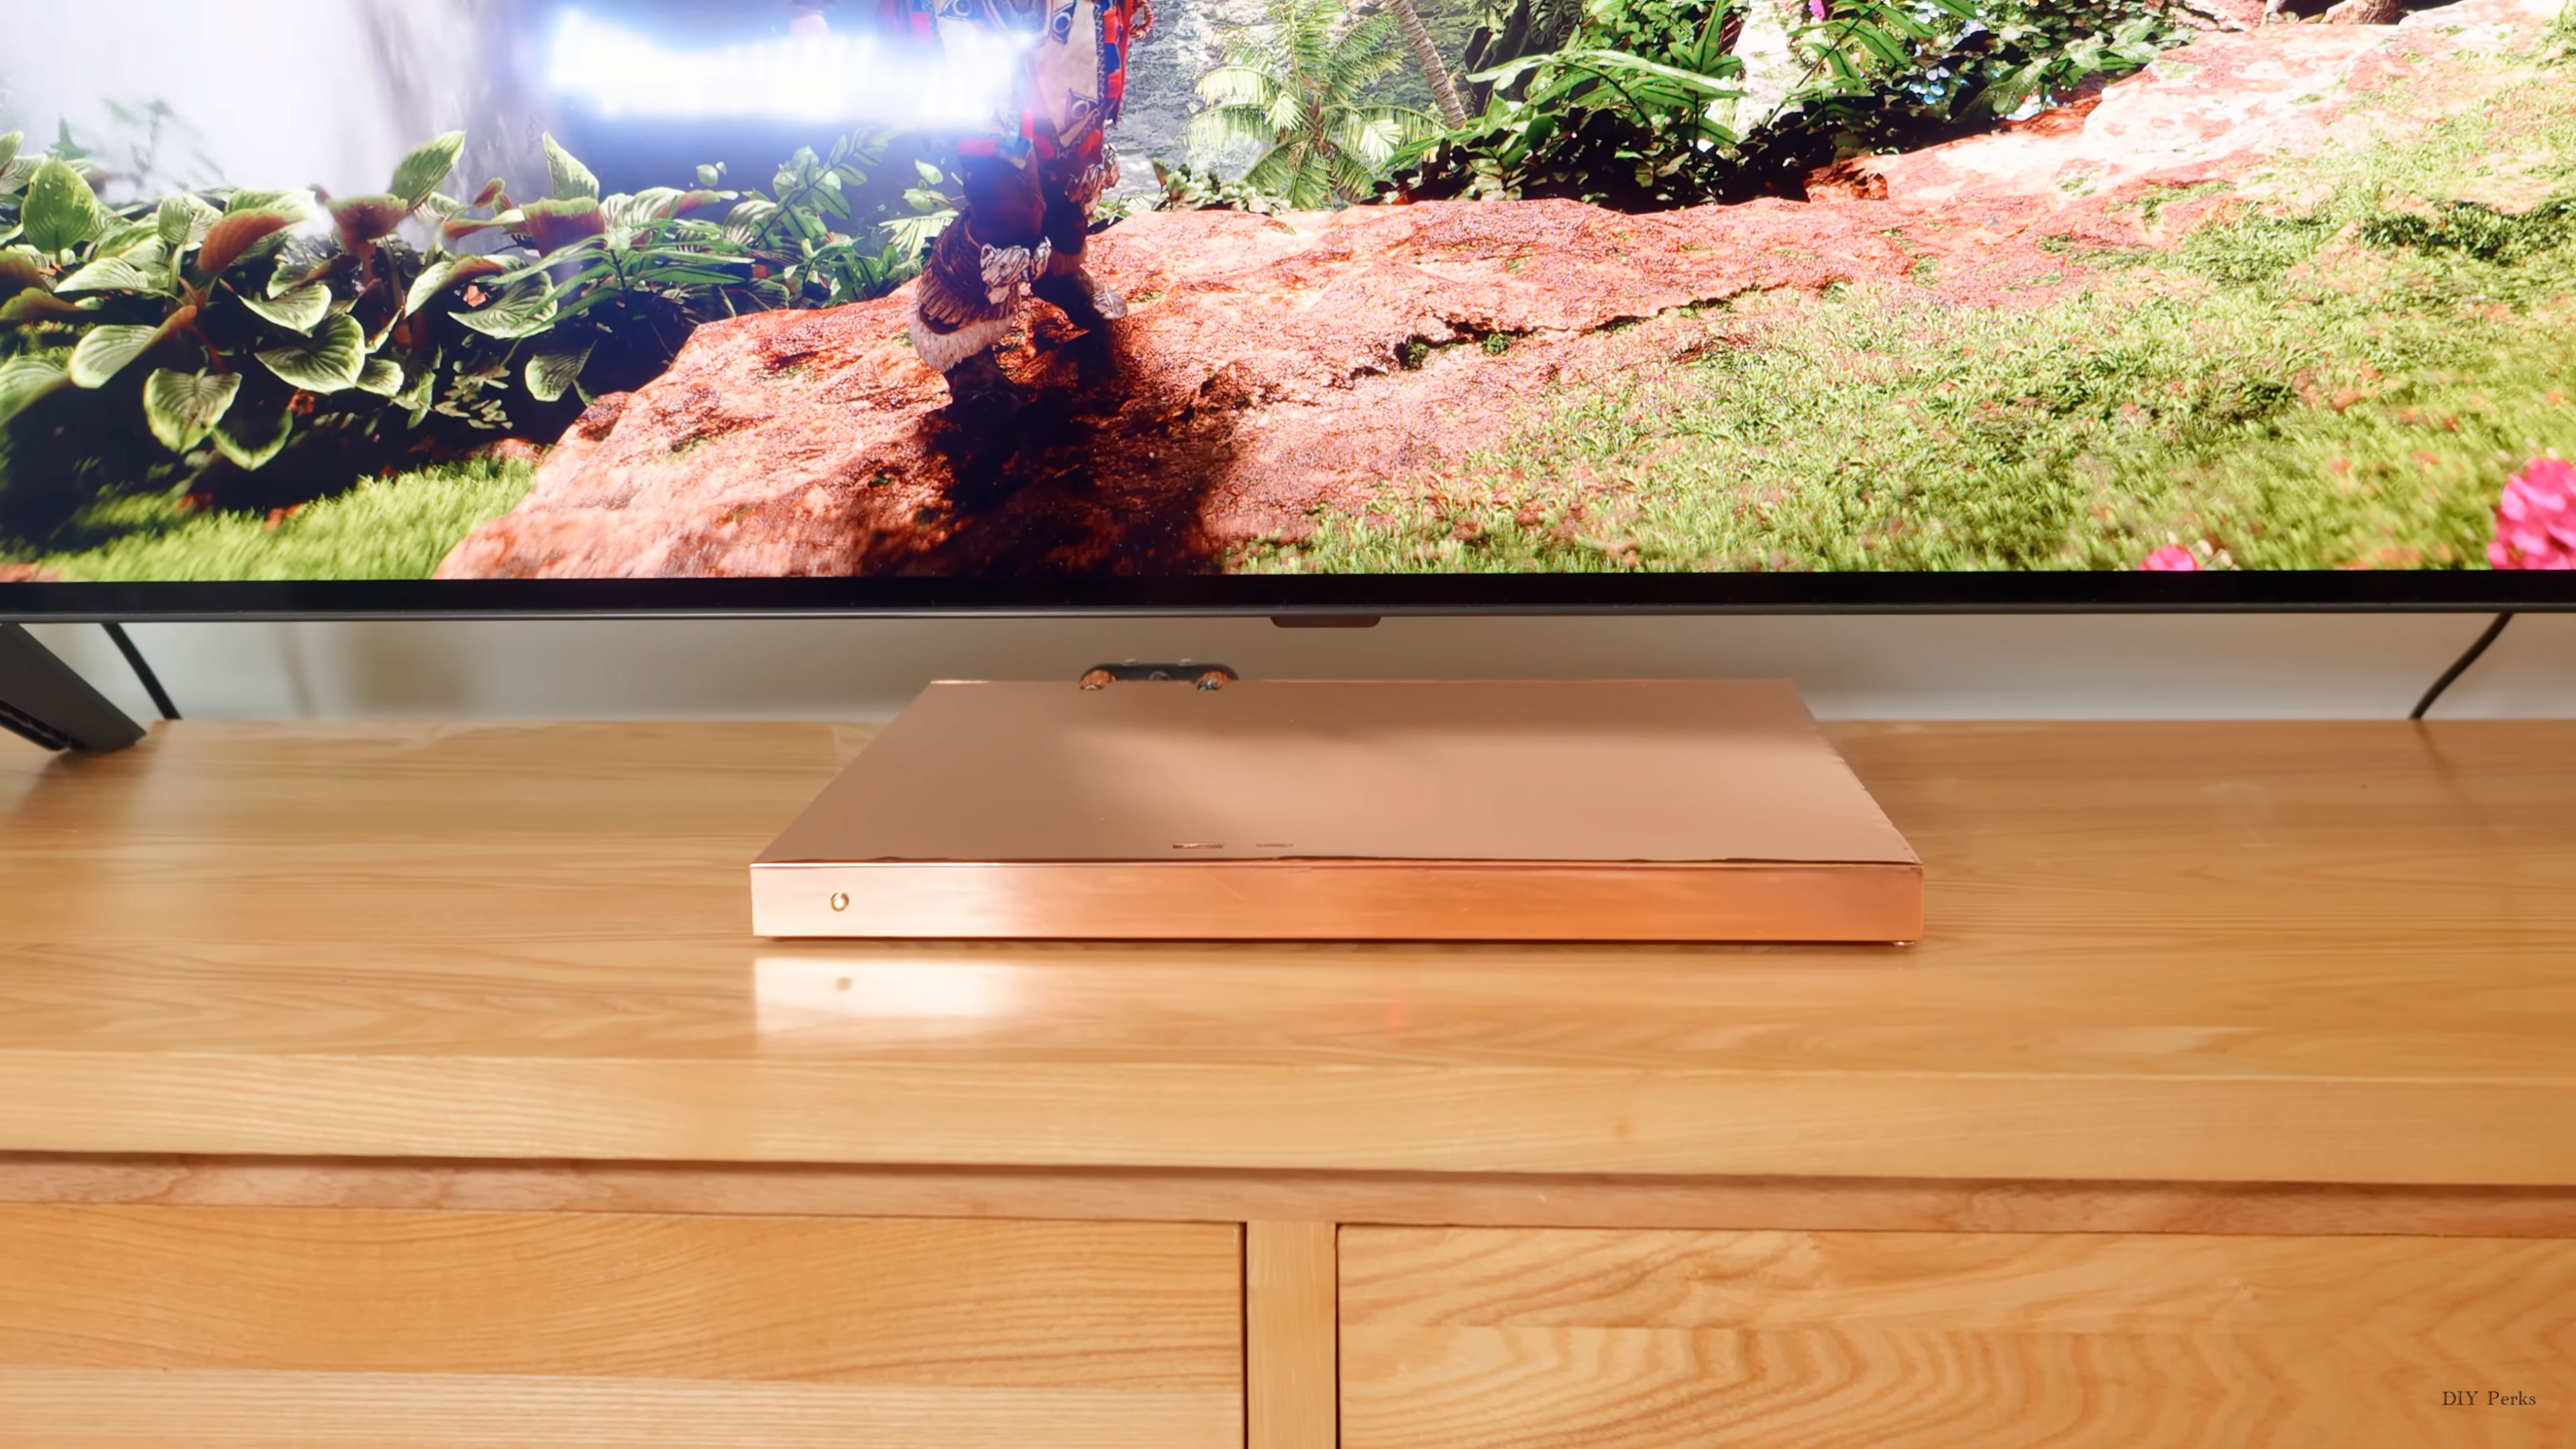 DIY PS5 Slim hides a water-cooling brick behind a TV cabinet